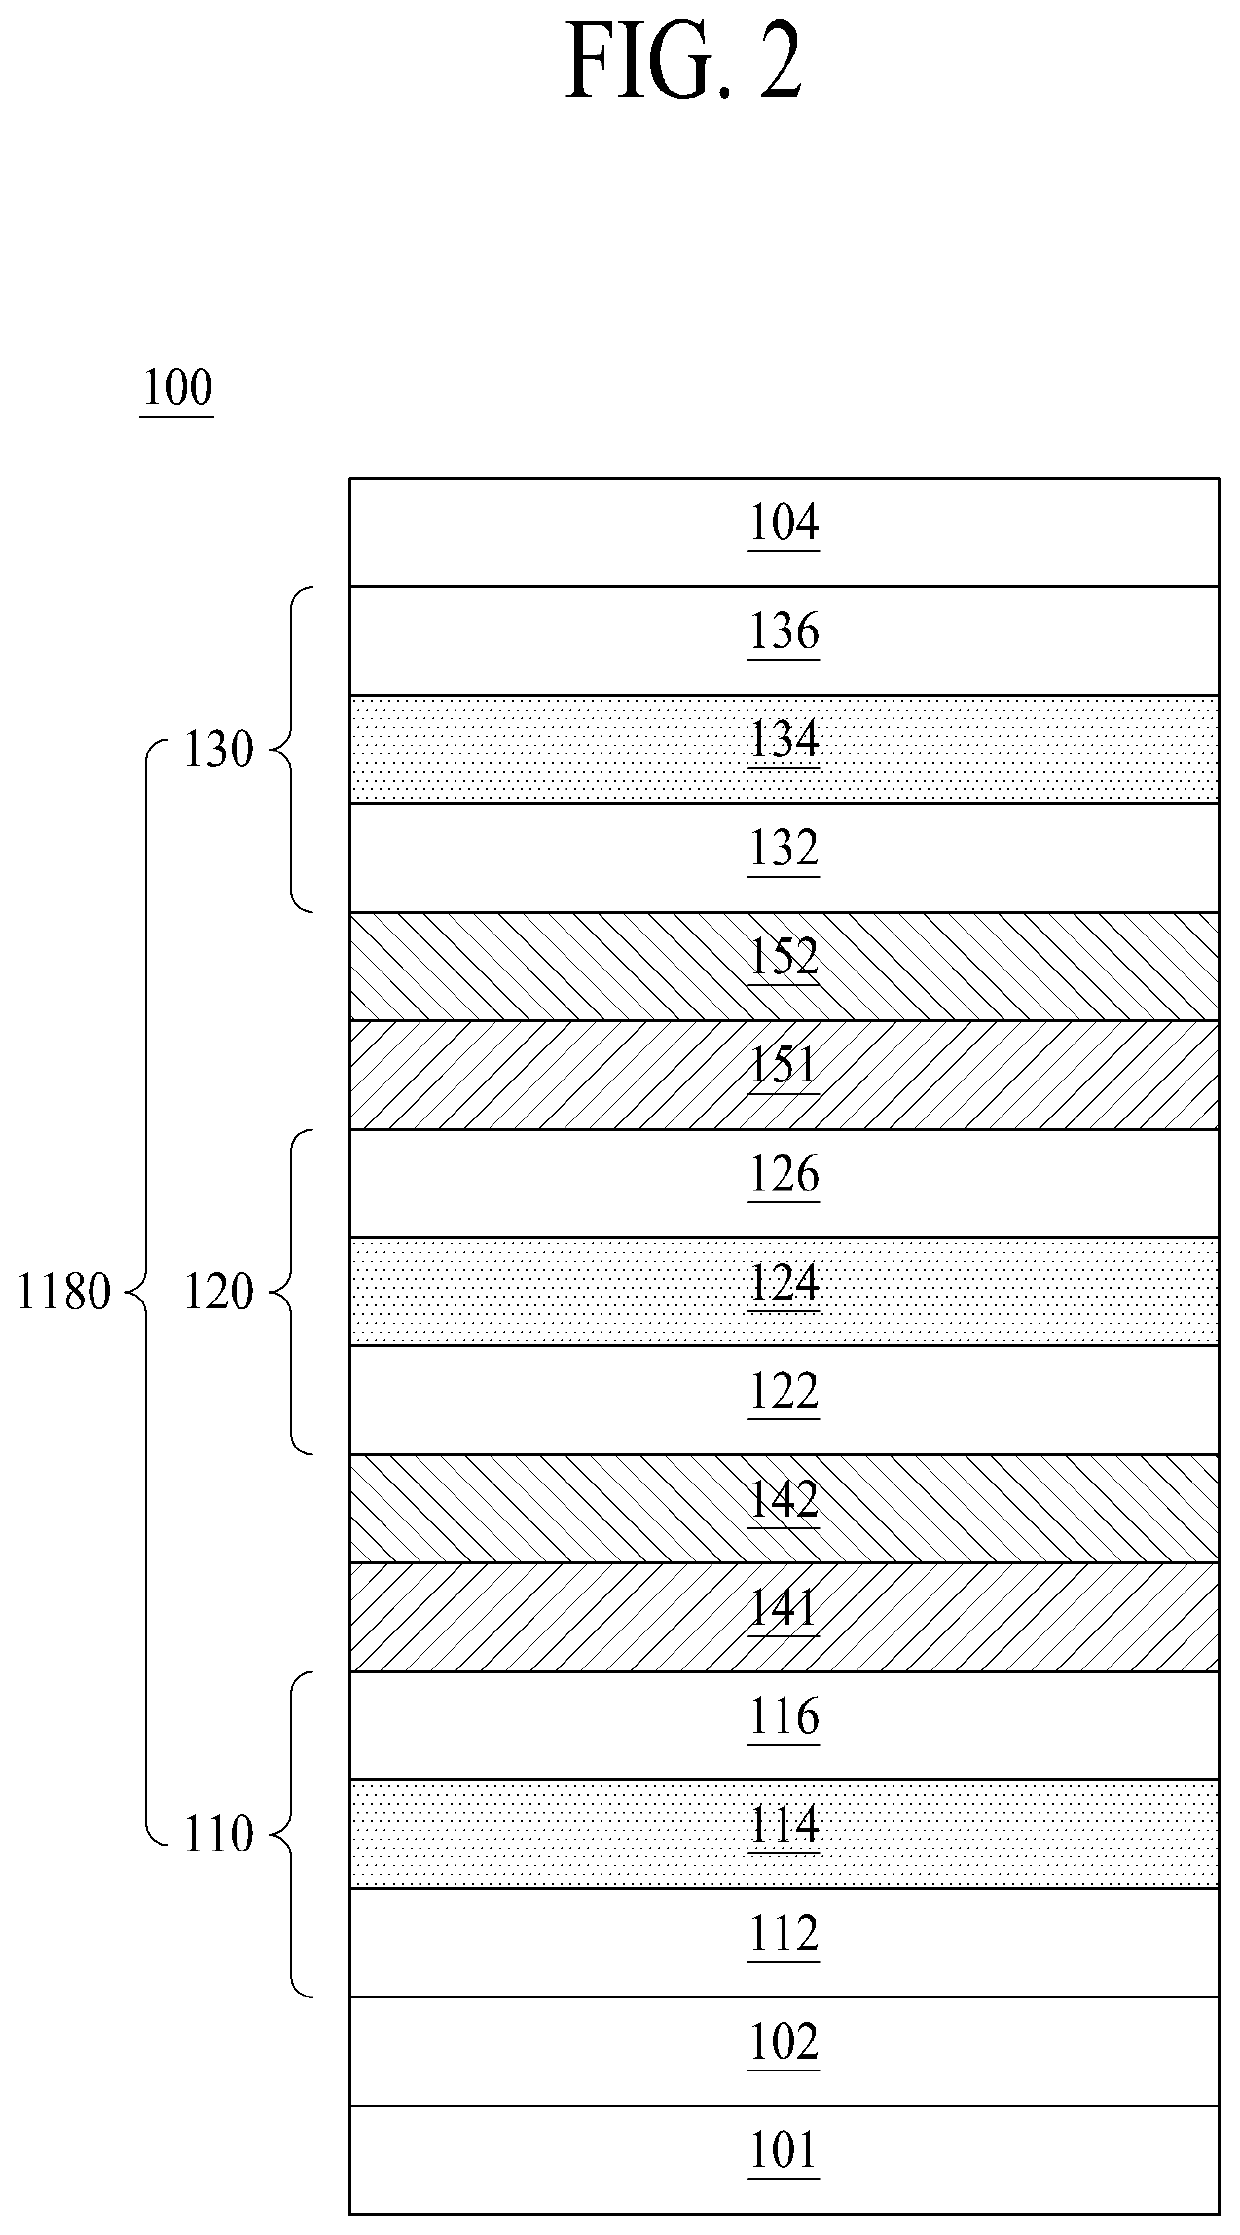 Organic light emitting display device (OLED) having p-type charge generation layer (CGL) formed between emissions stack